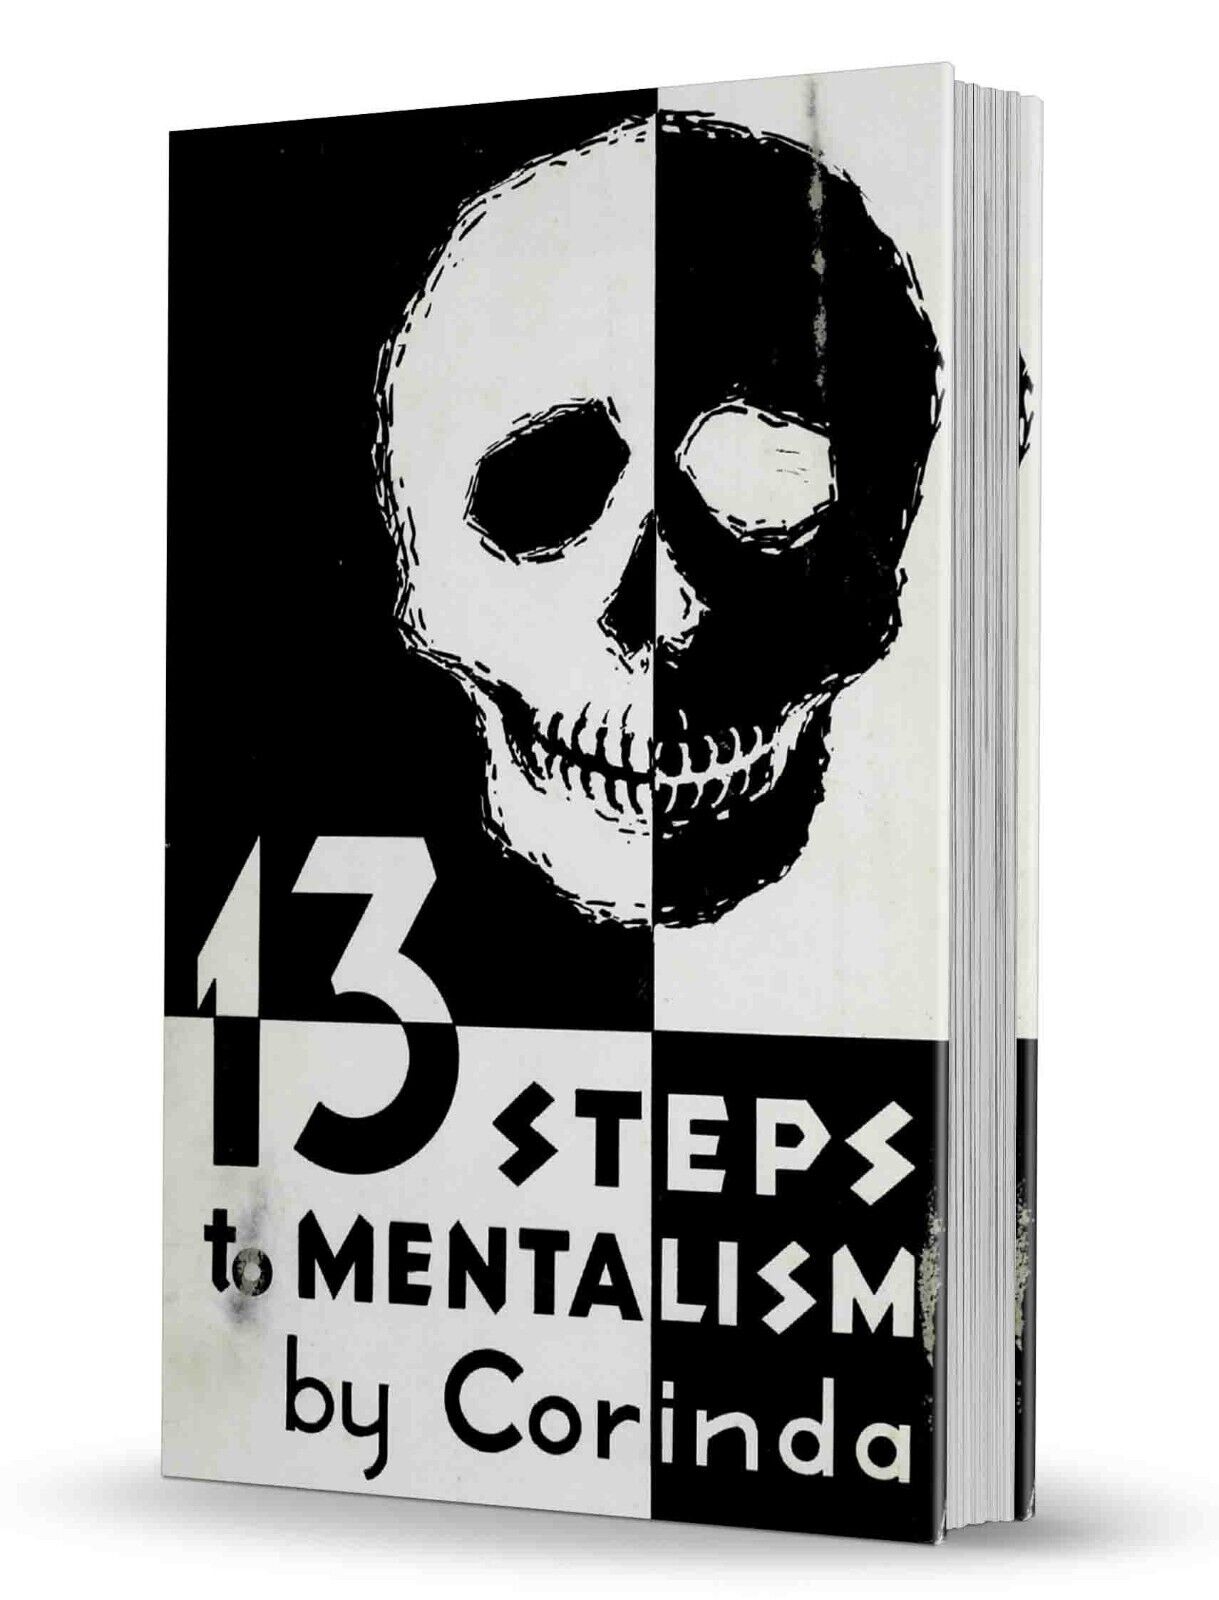 13 STEPS TO MENTALISM by Tony Corinda - New Paper-wrapped UK 1st Edition 1958